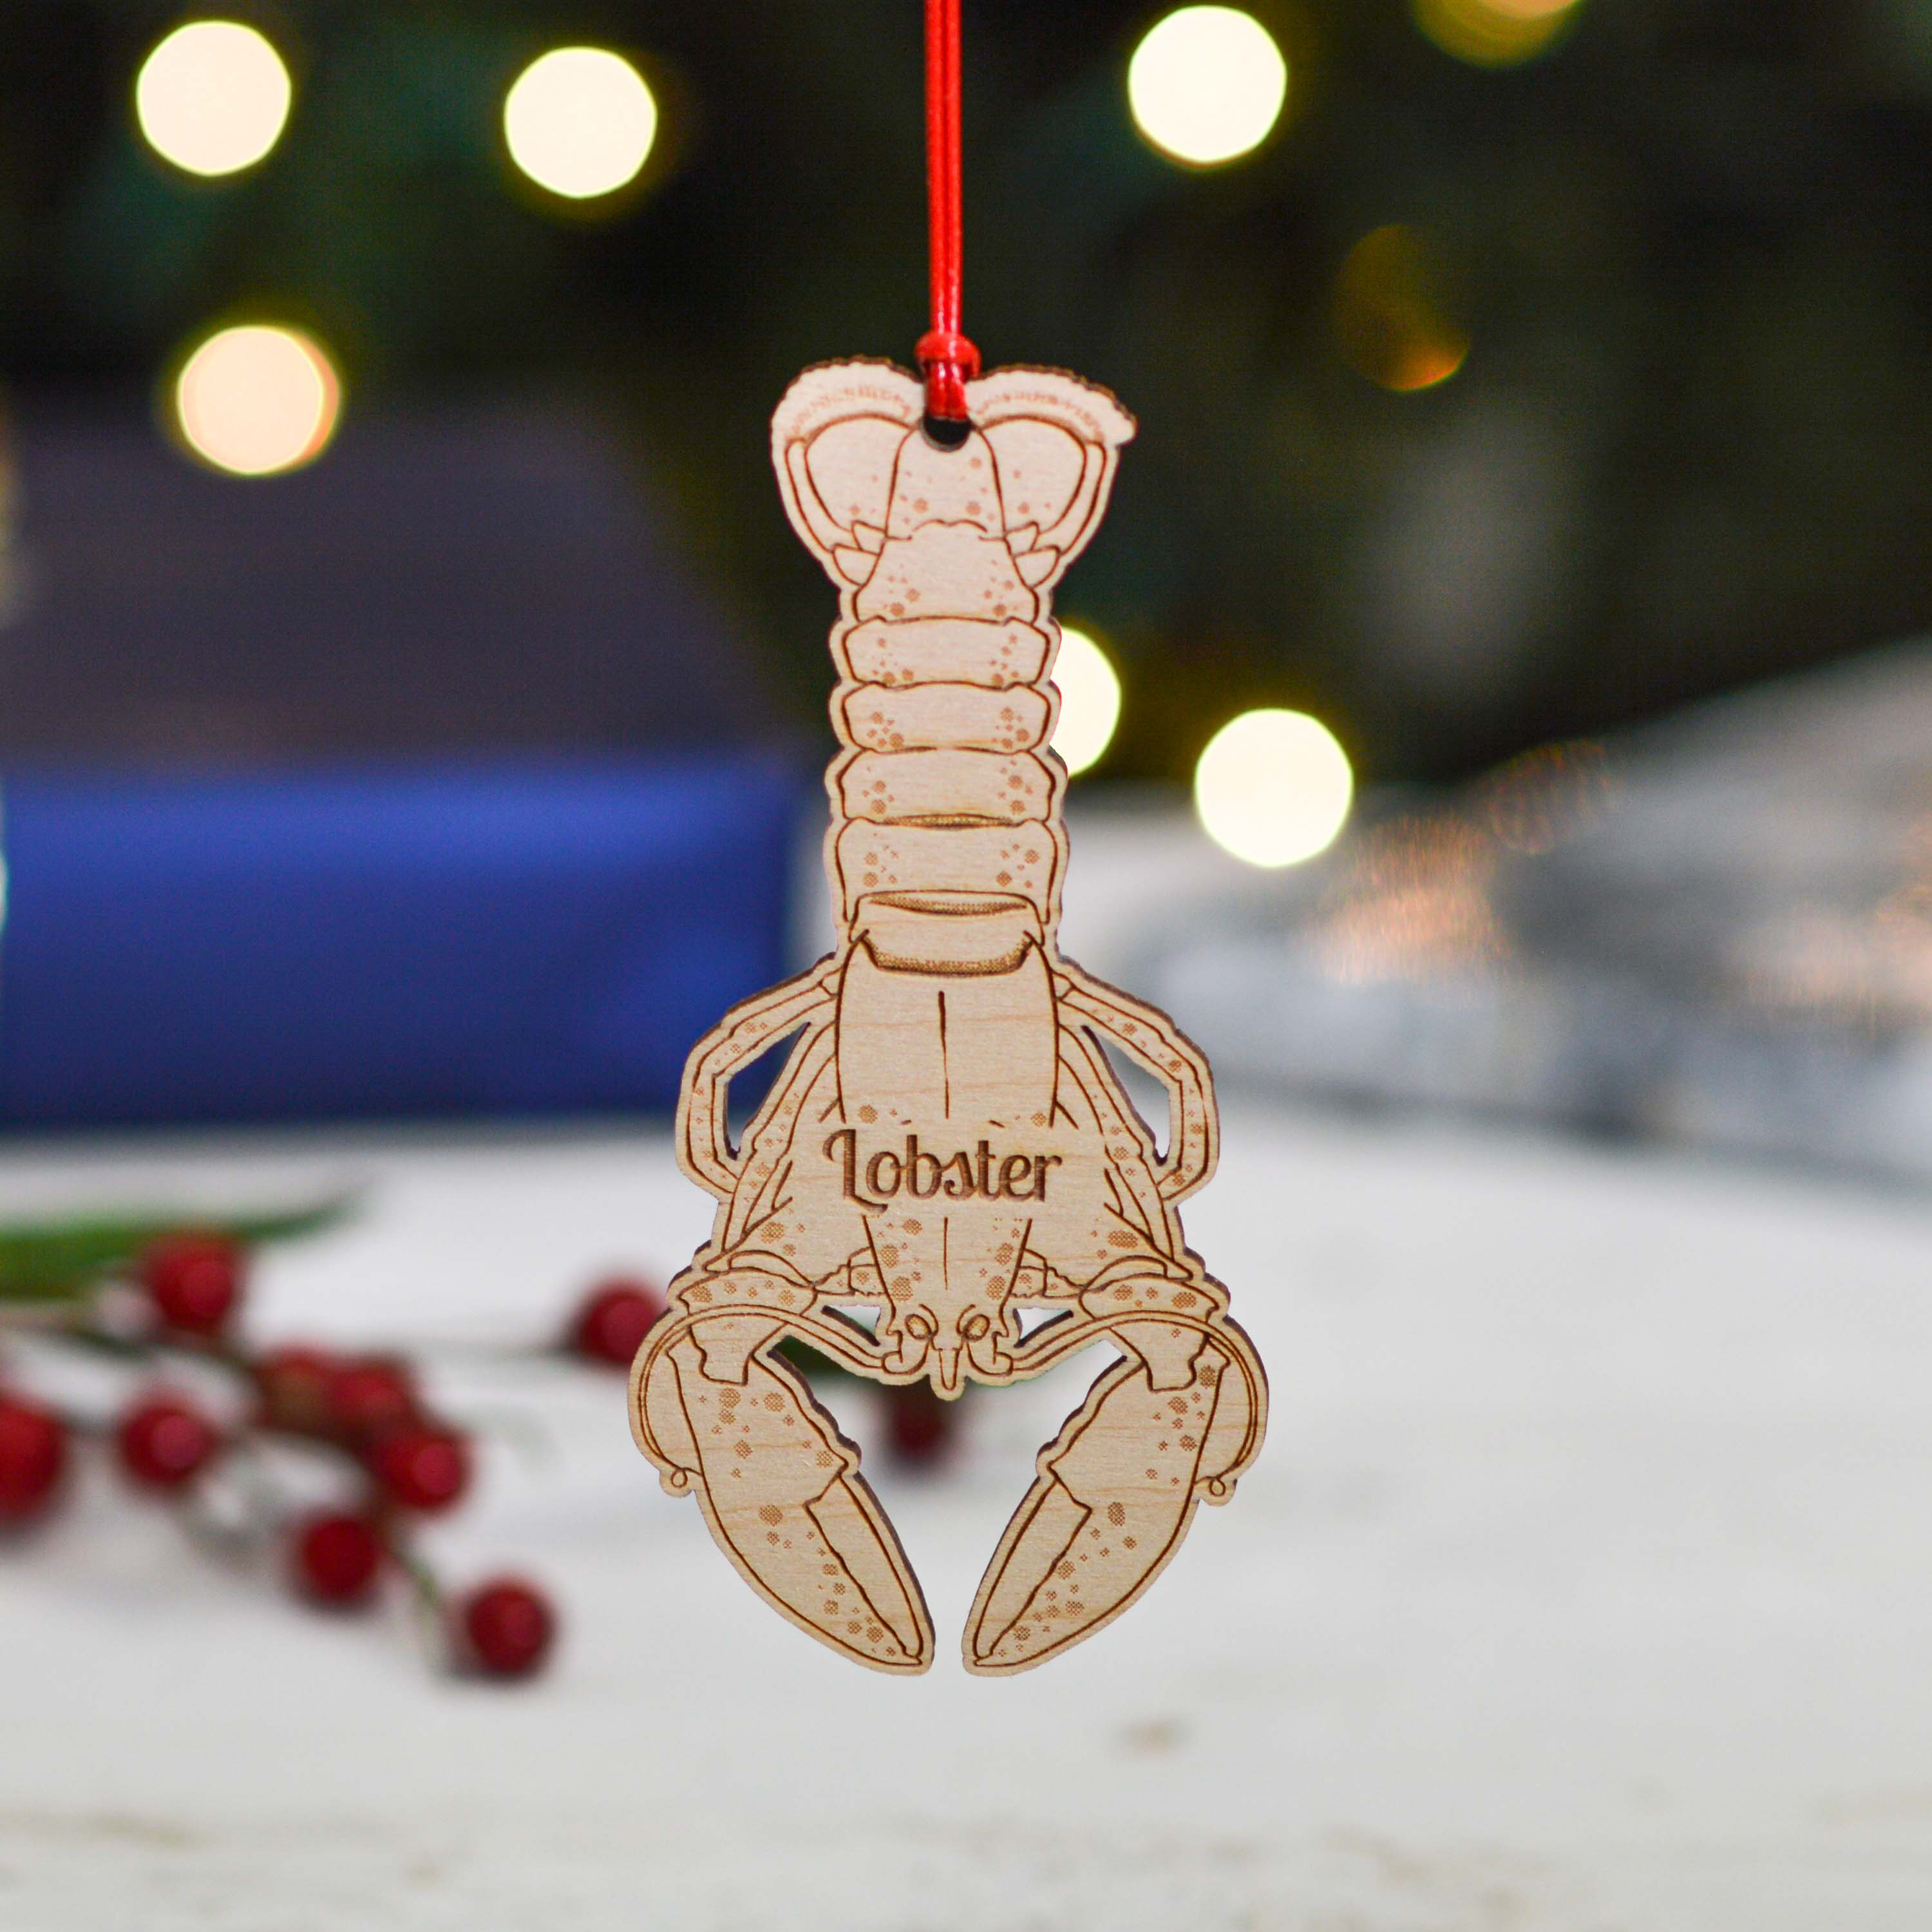 Personalised Lobster Decoration